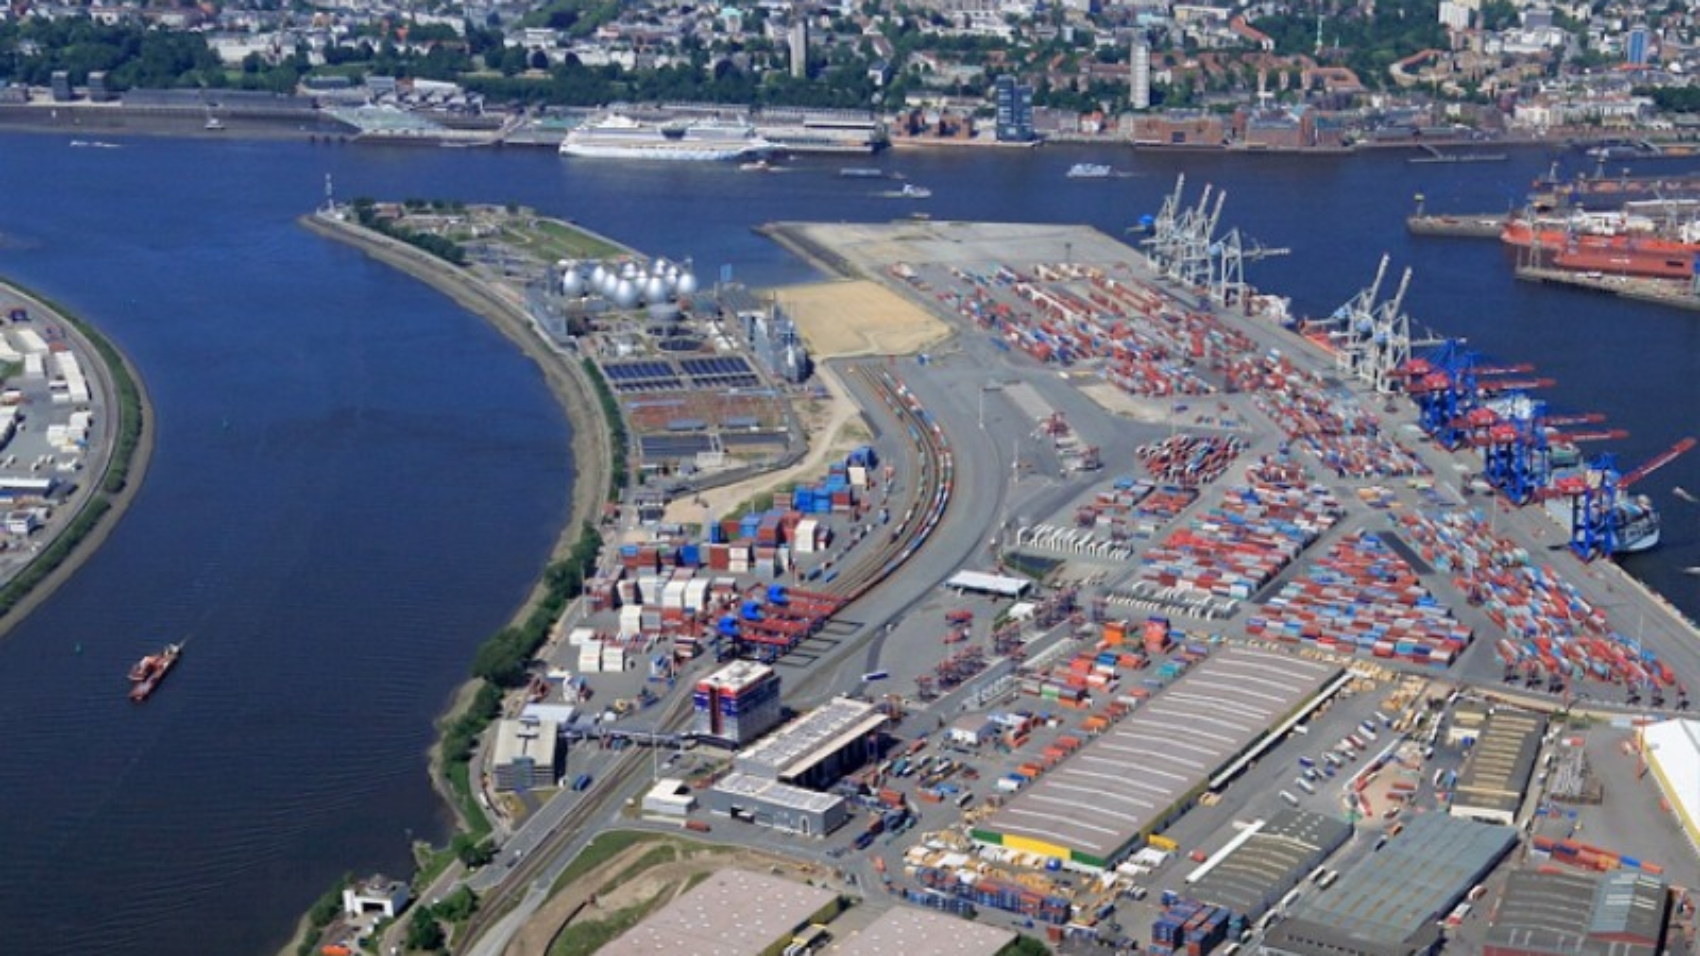 HHLA-Container-Terminal-Tollerort-small